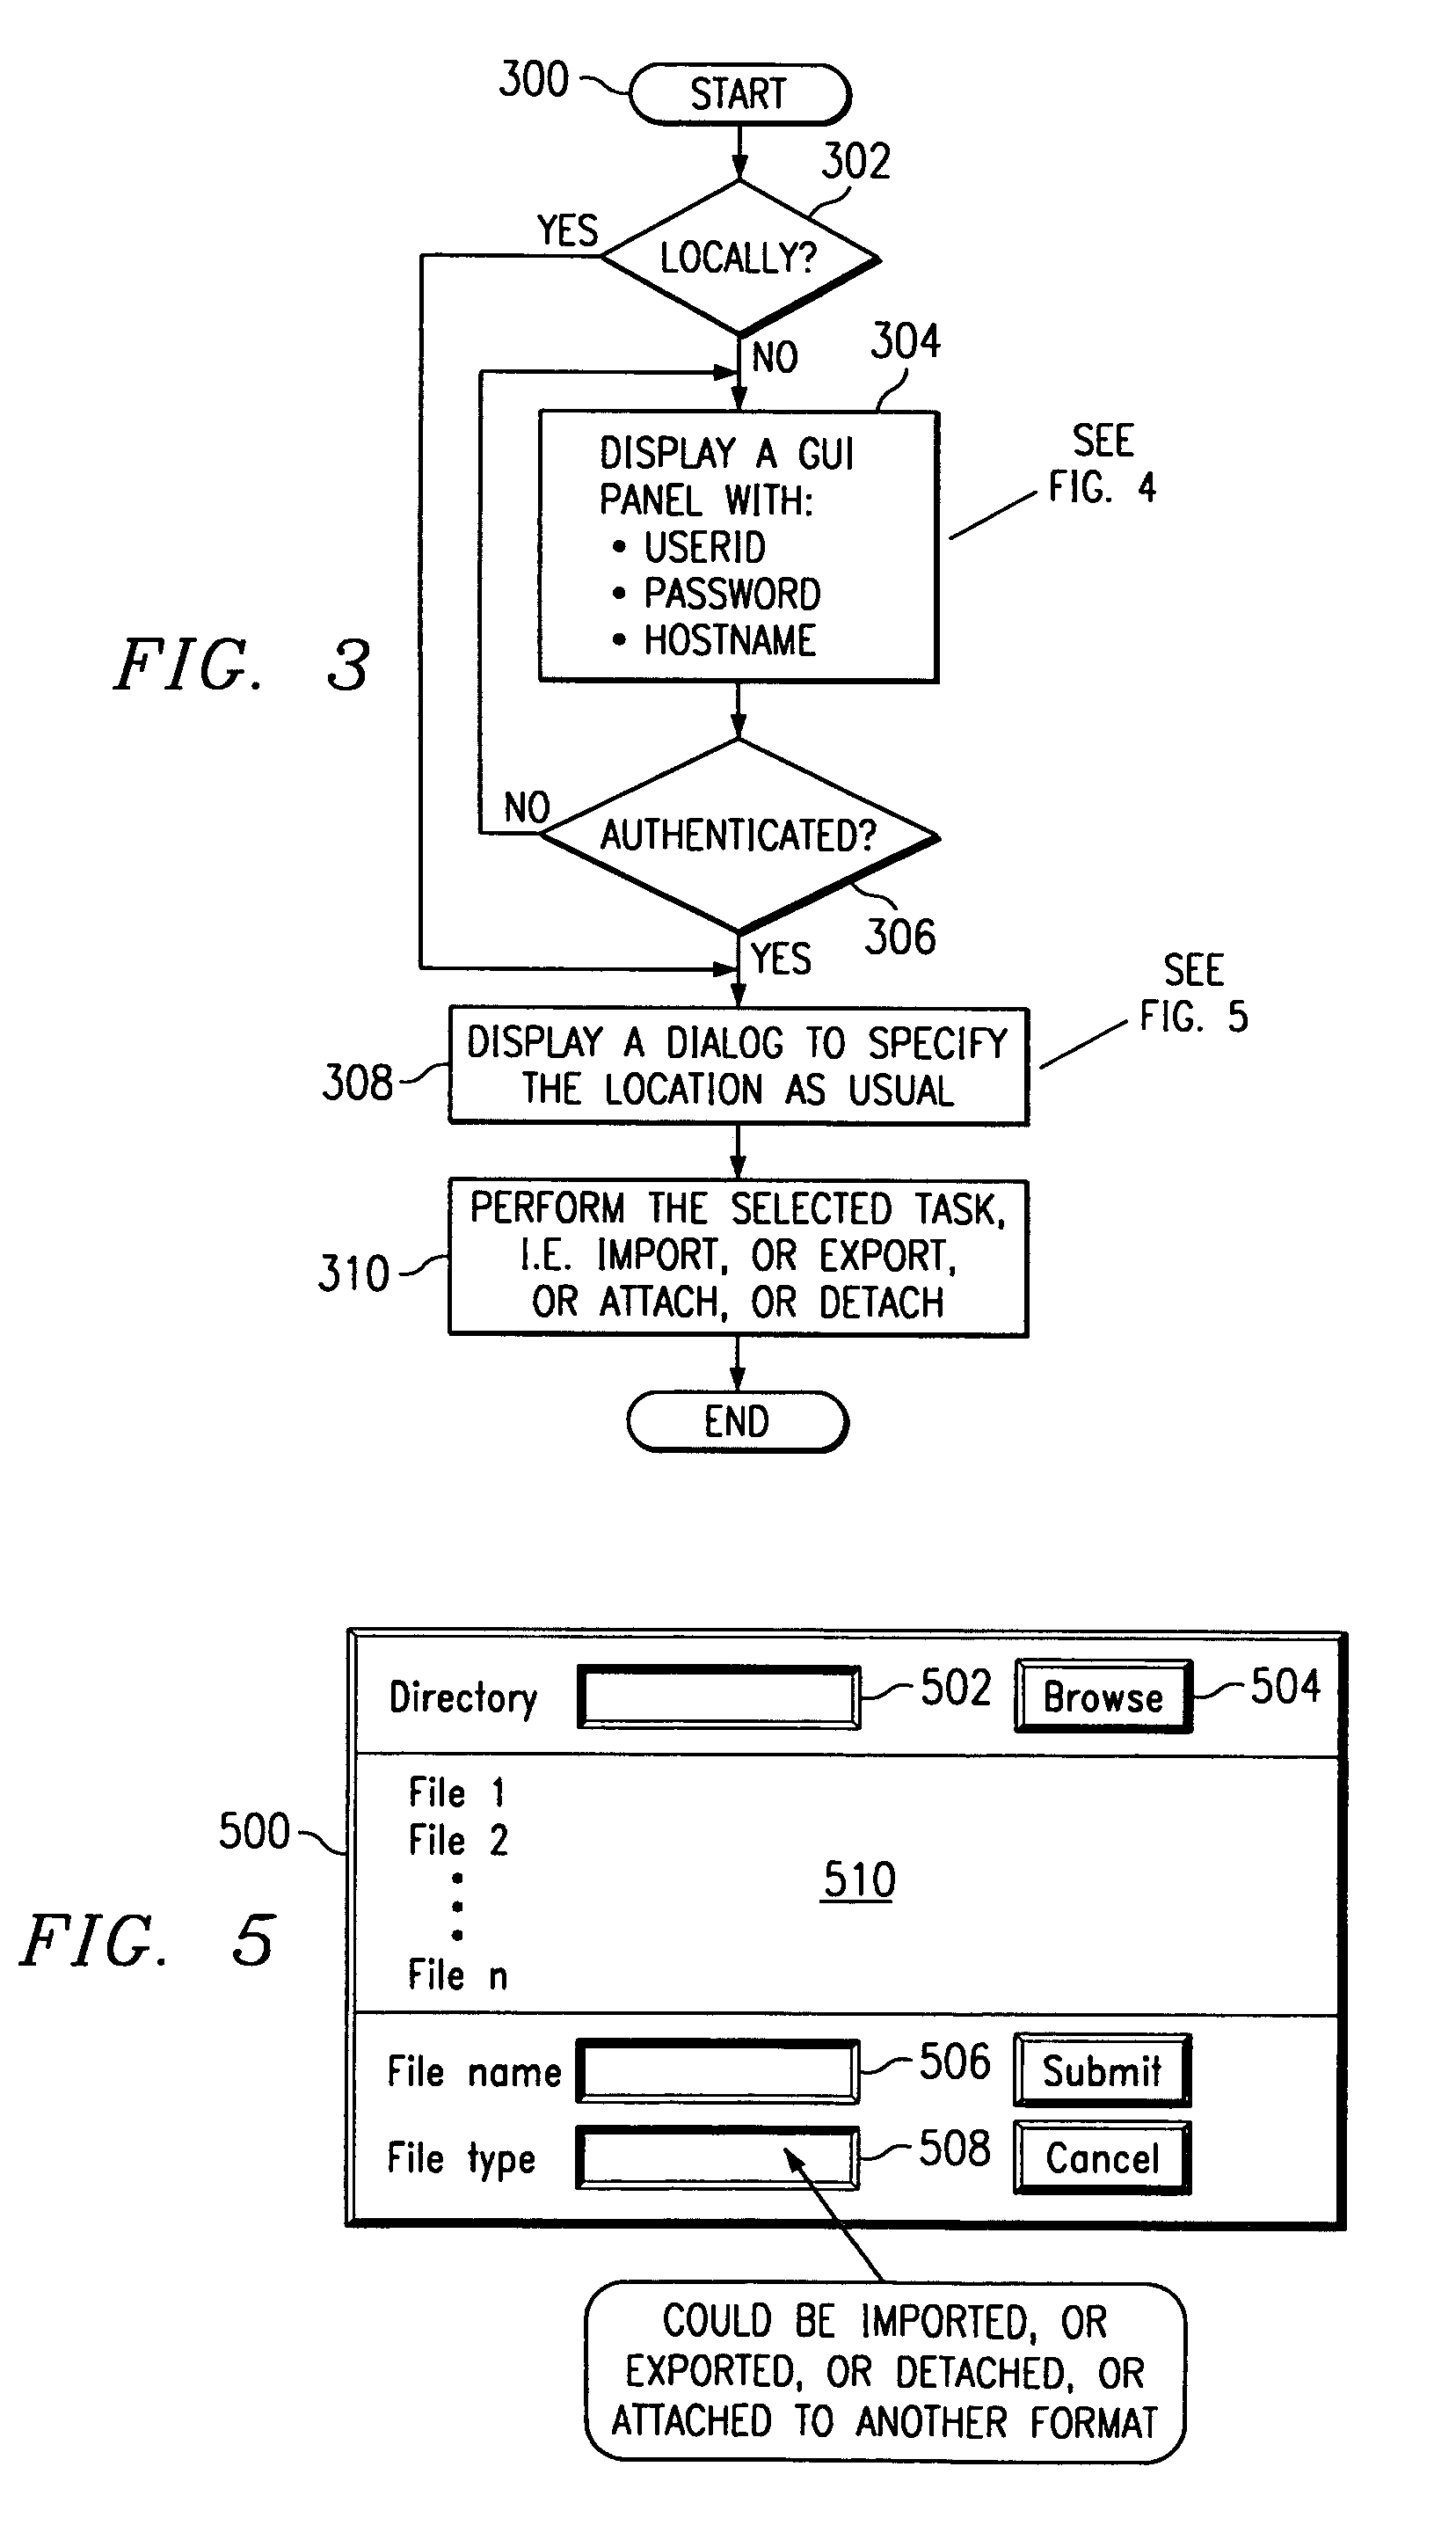 Method to import/export or detach/attach a file to/from a remote mail server